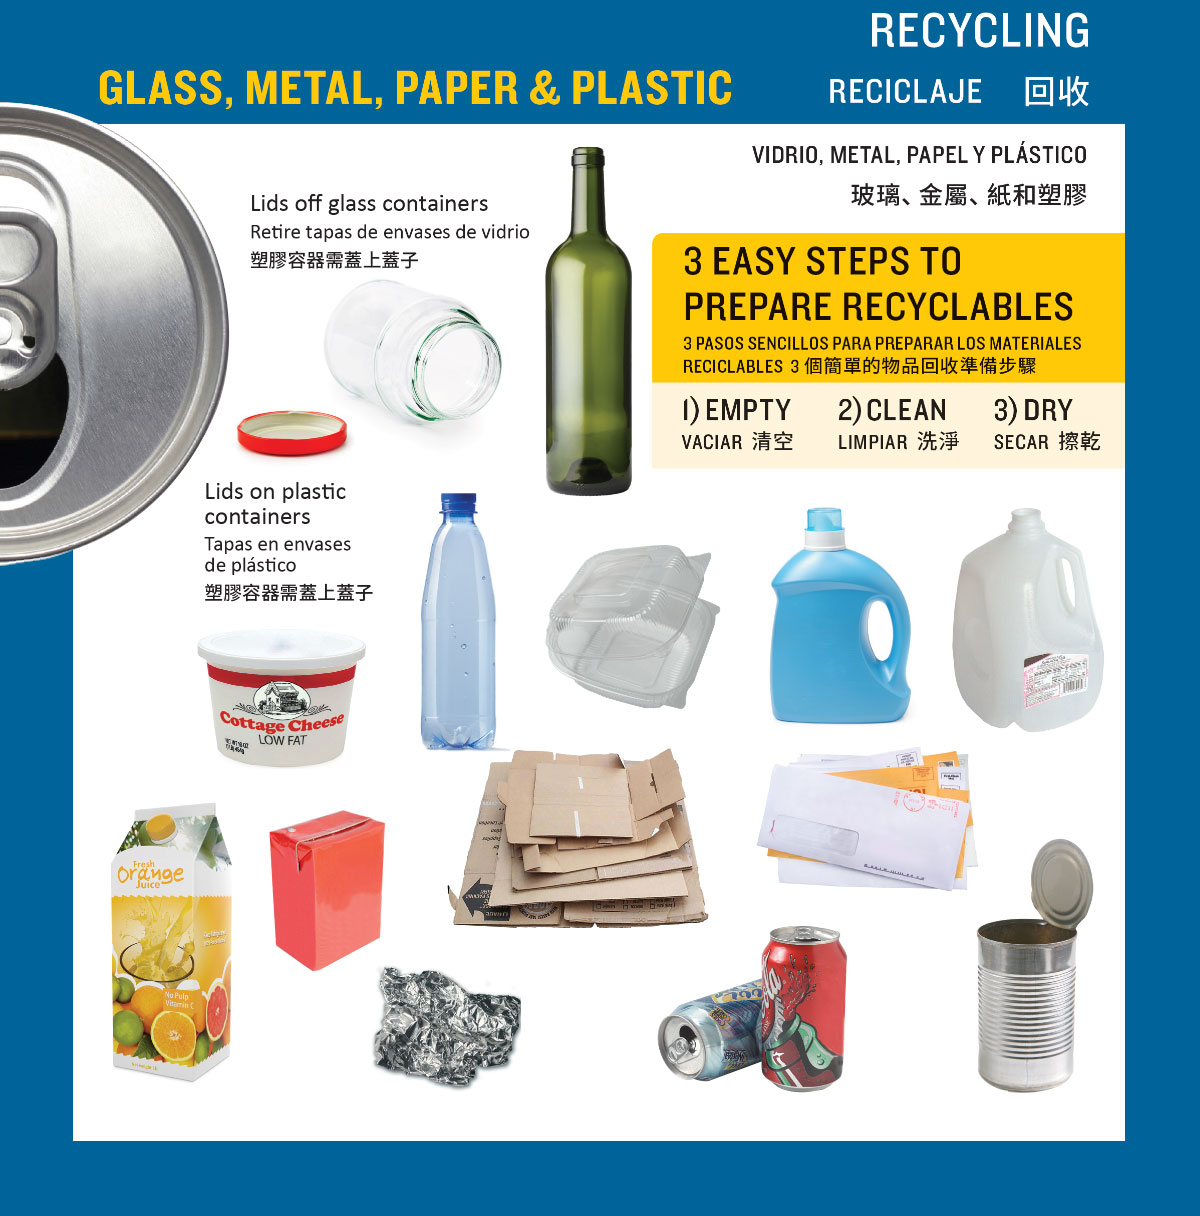 Image of materials that go in recycling: glass, metal, plastic tubs bottles, paper